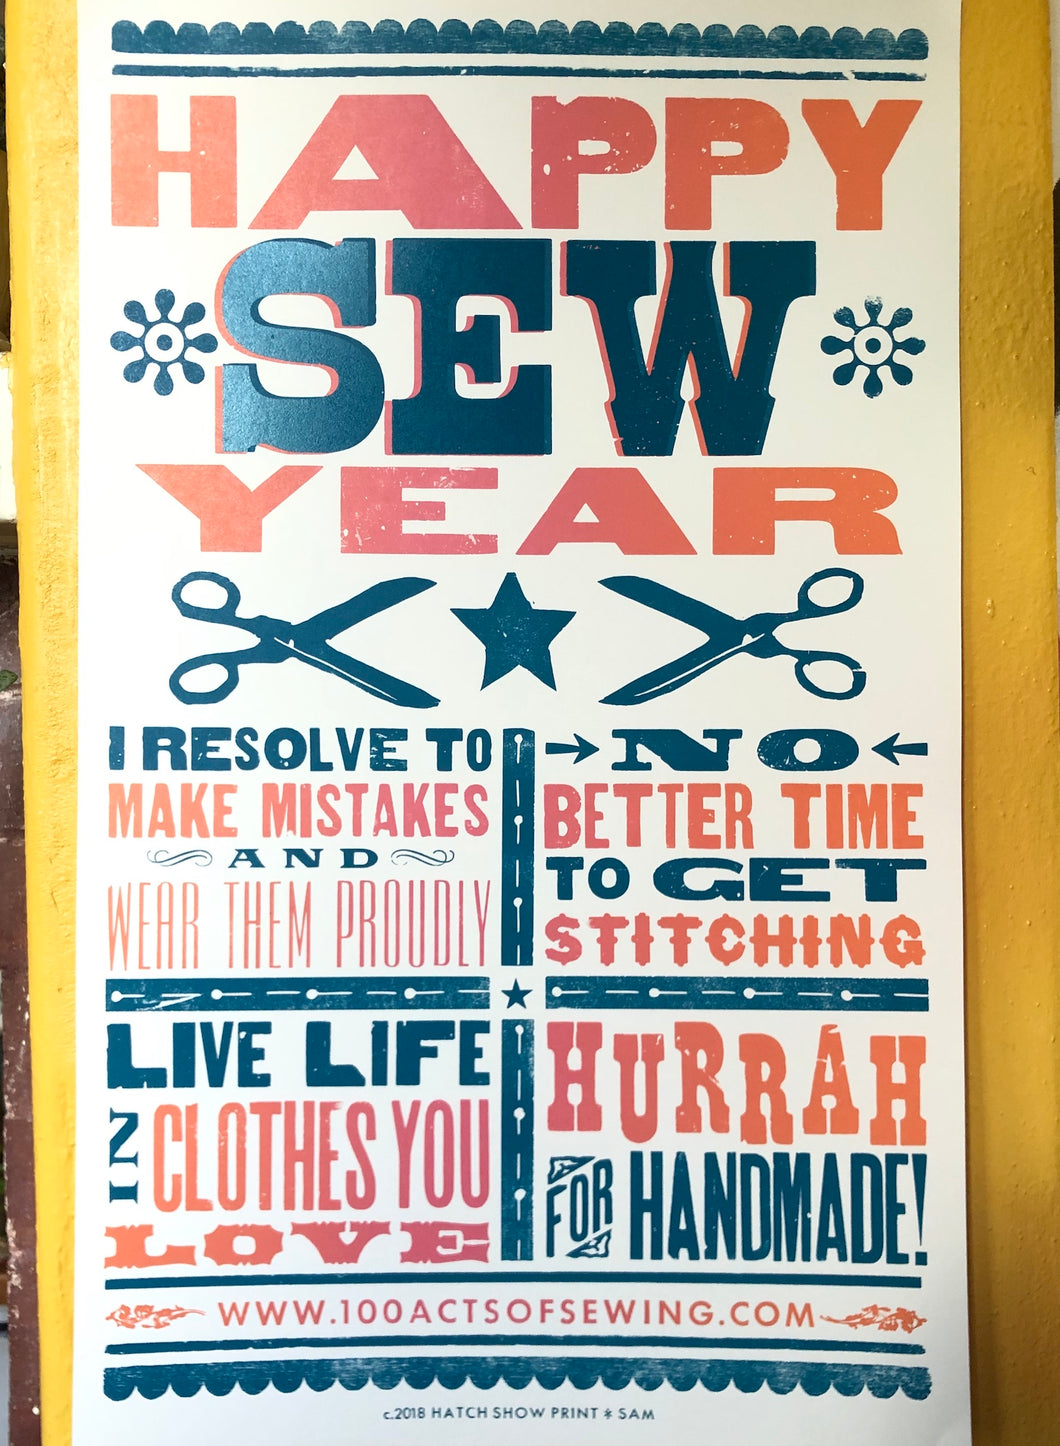 100 Acts of Sewing - Happy Sew Year Poster